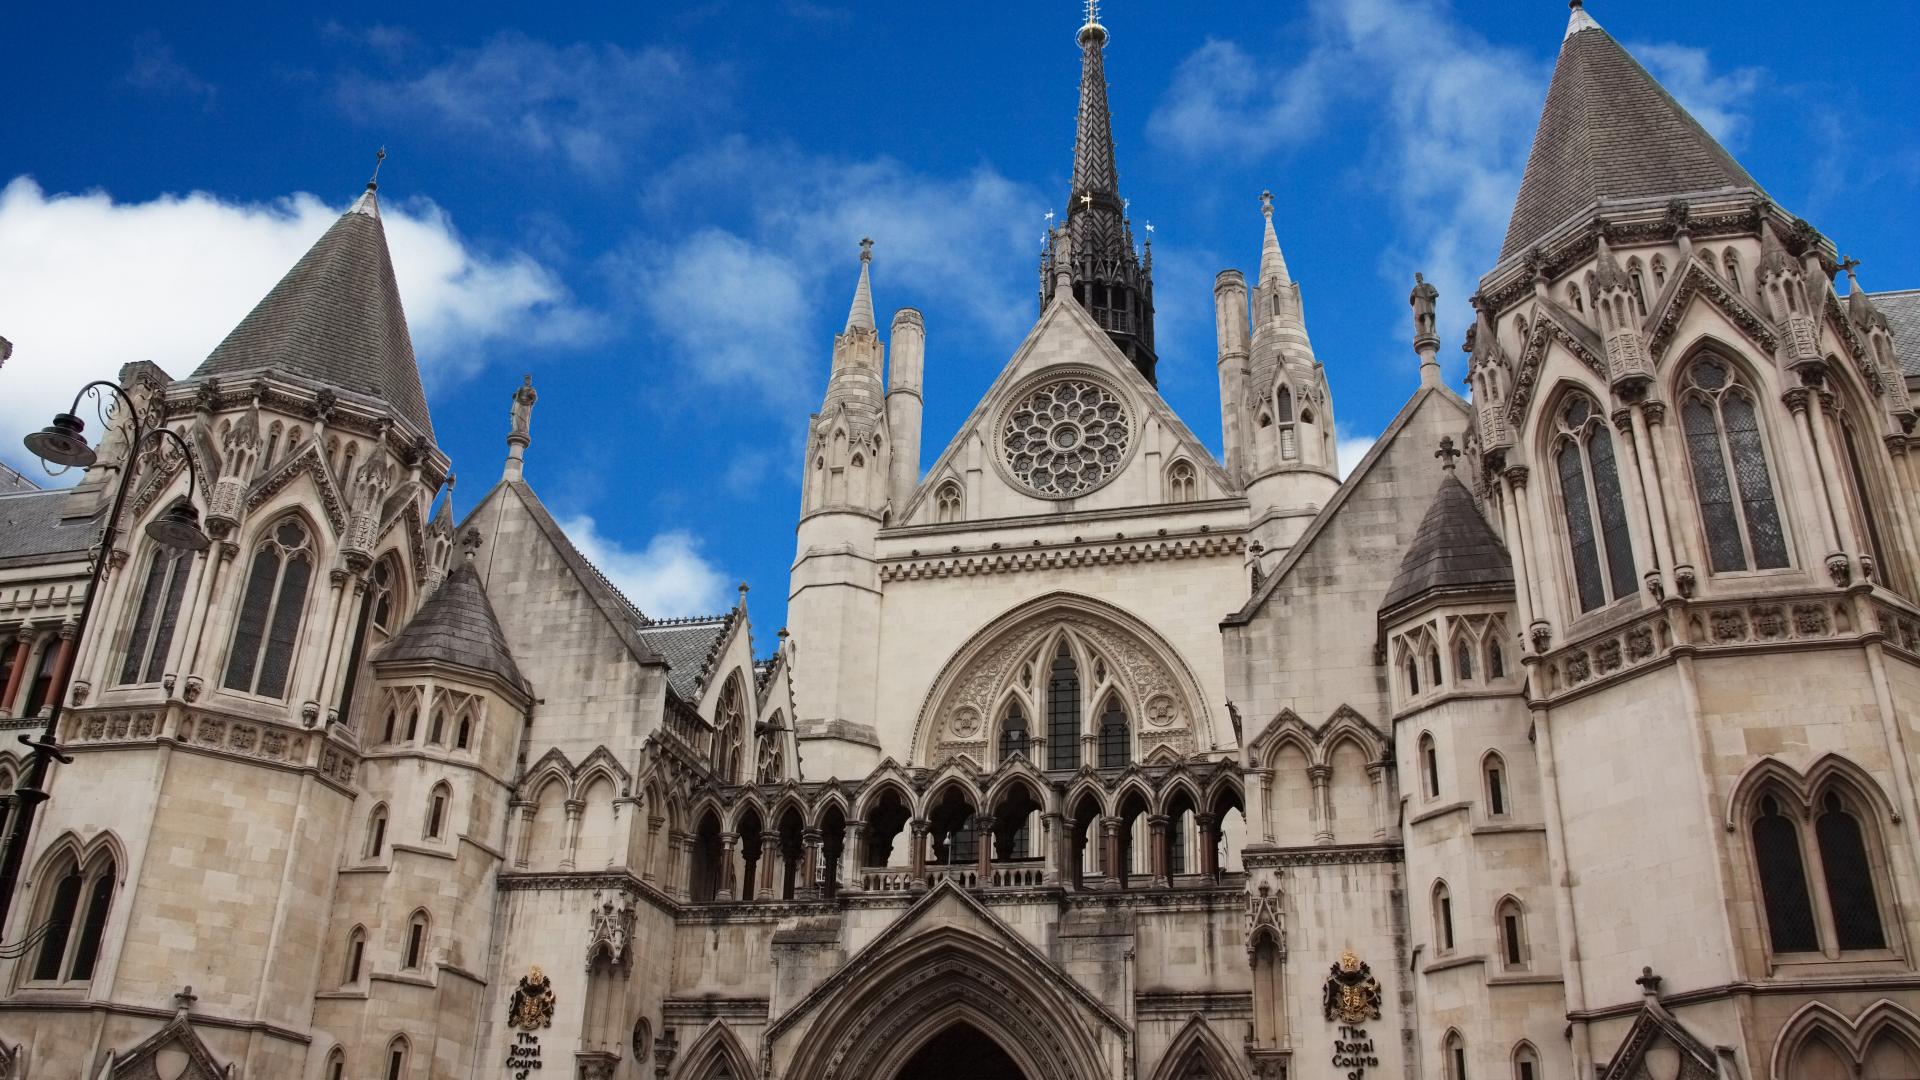 View of the Royal Courts of Justice, London